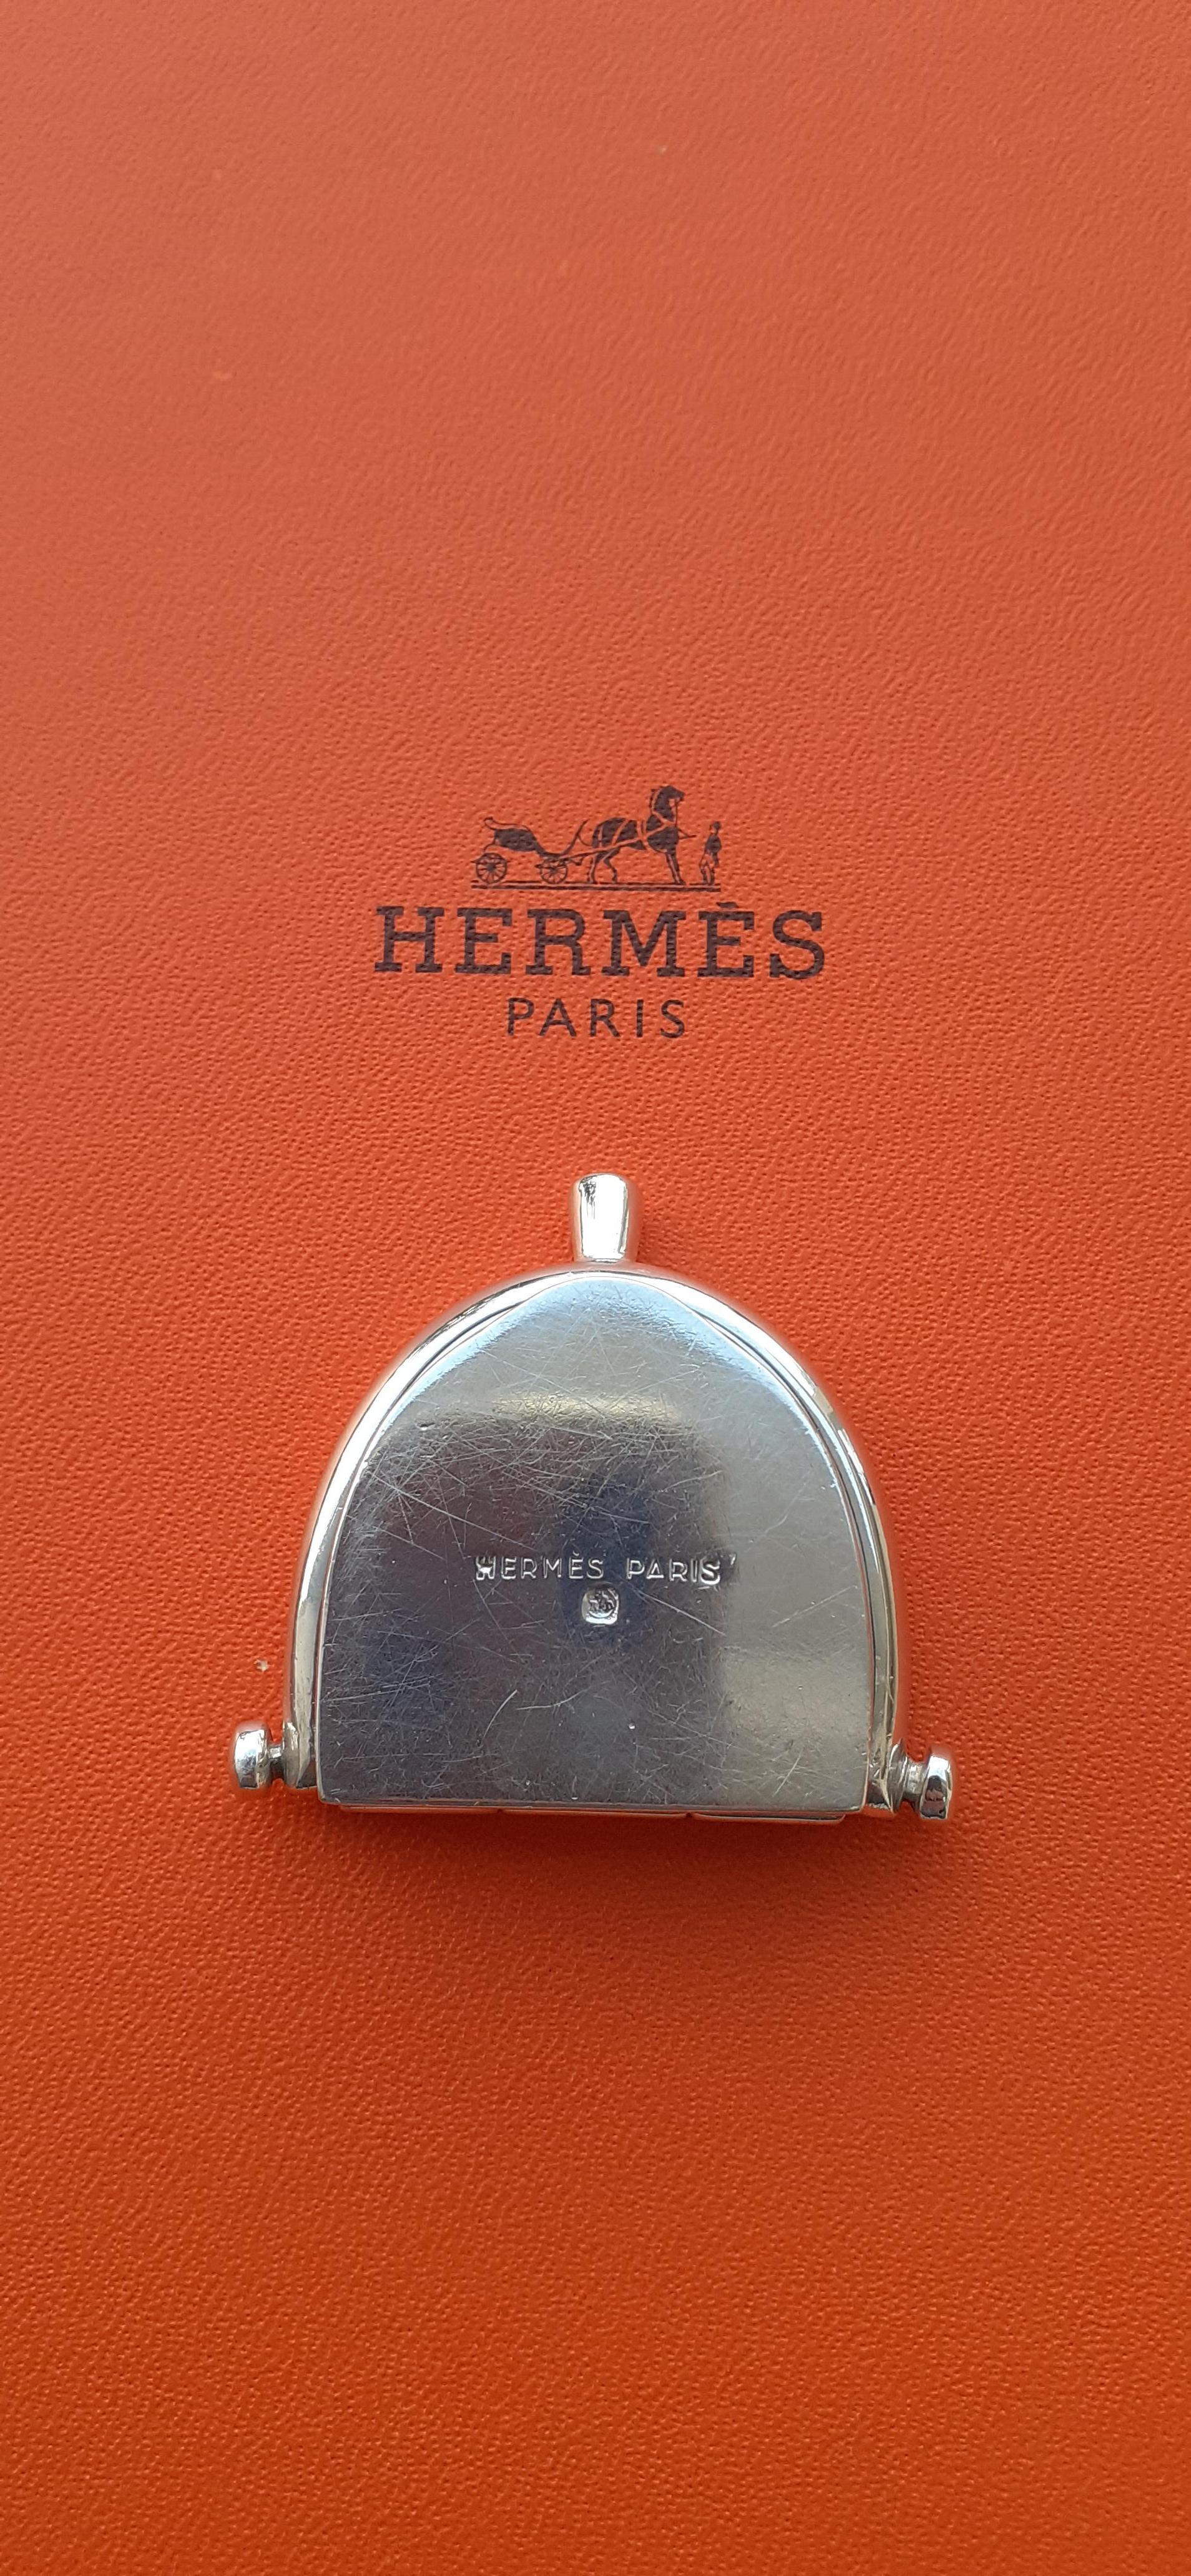 Exceptional Hermès Guilloche Spur Shaped Pill Box By Ravinet d'Enfert For Sale 2